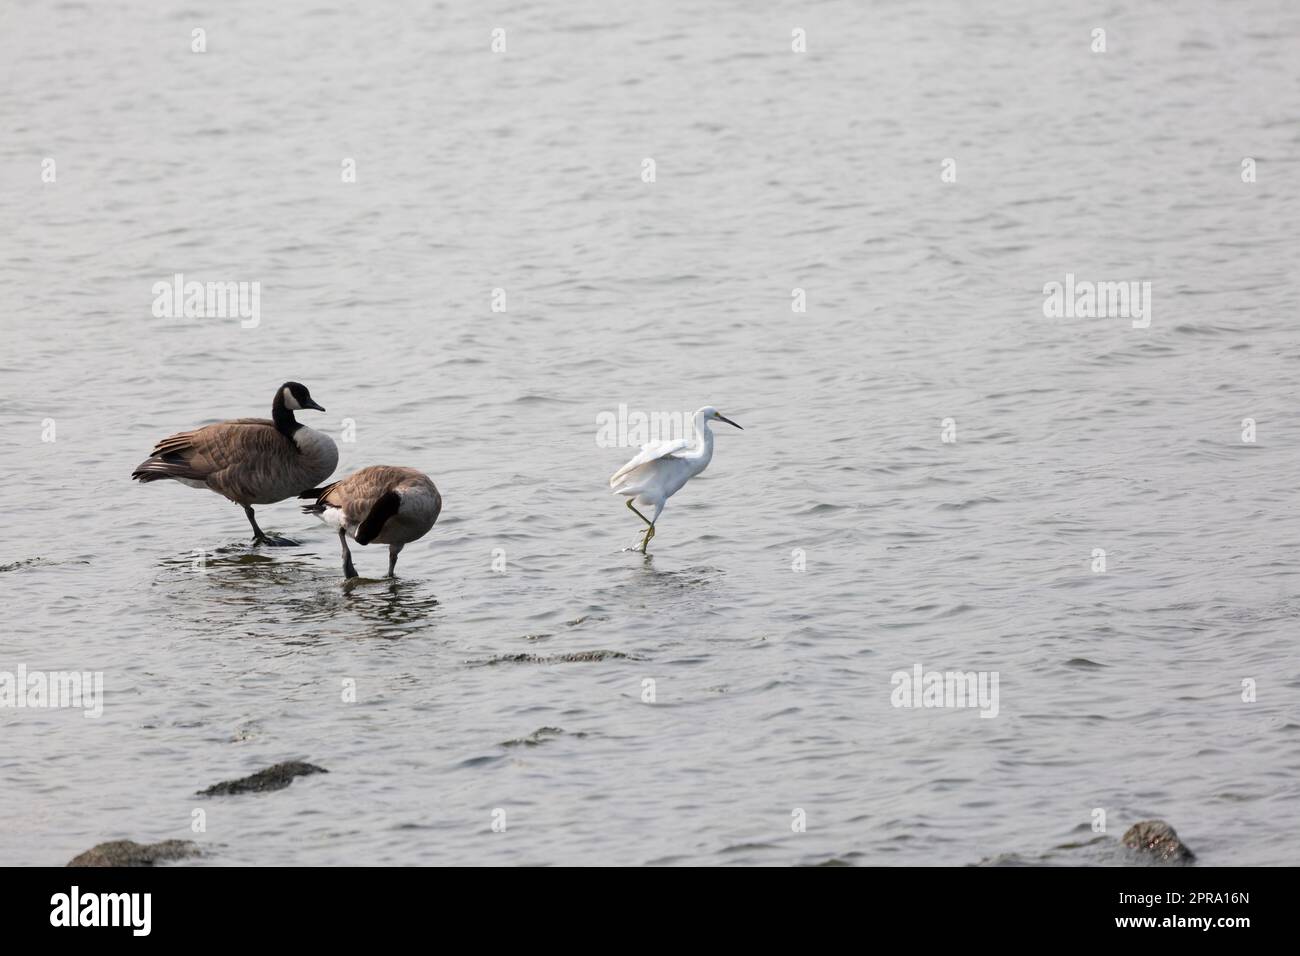 Immature Snowy Egret with Canada Geese Stock Photo